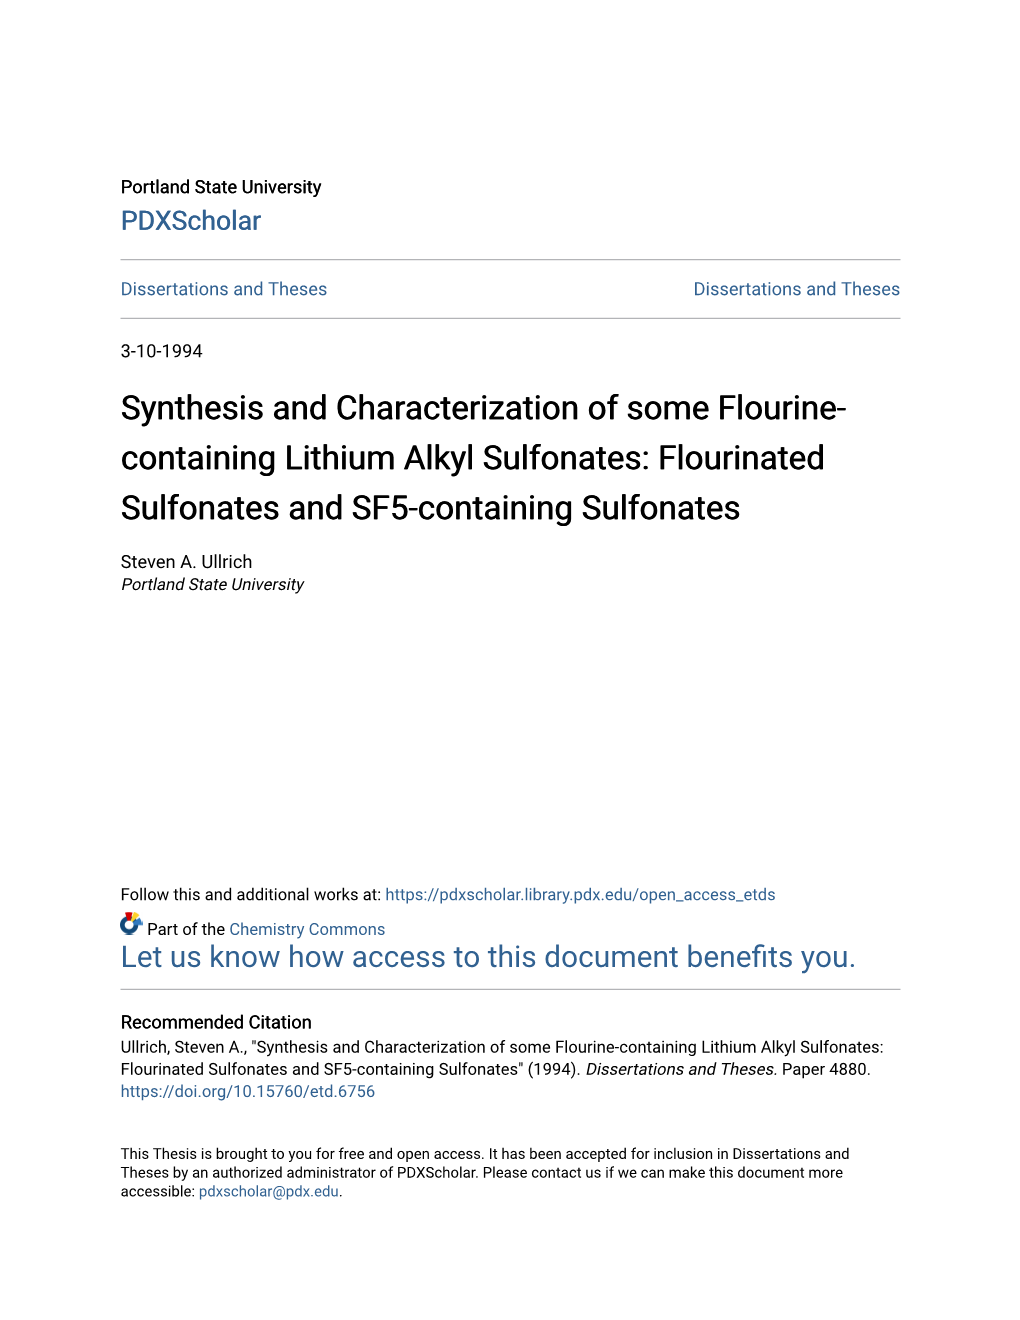 Synthesis and Characterization of Some Flourine-Containing Lithium Alkyl Sulfonates: Flourinated Sulfonates and SF5-Containing Sulfonates" (1994)